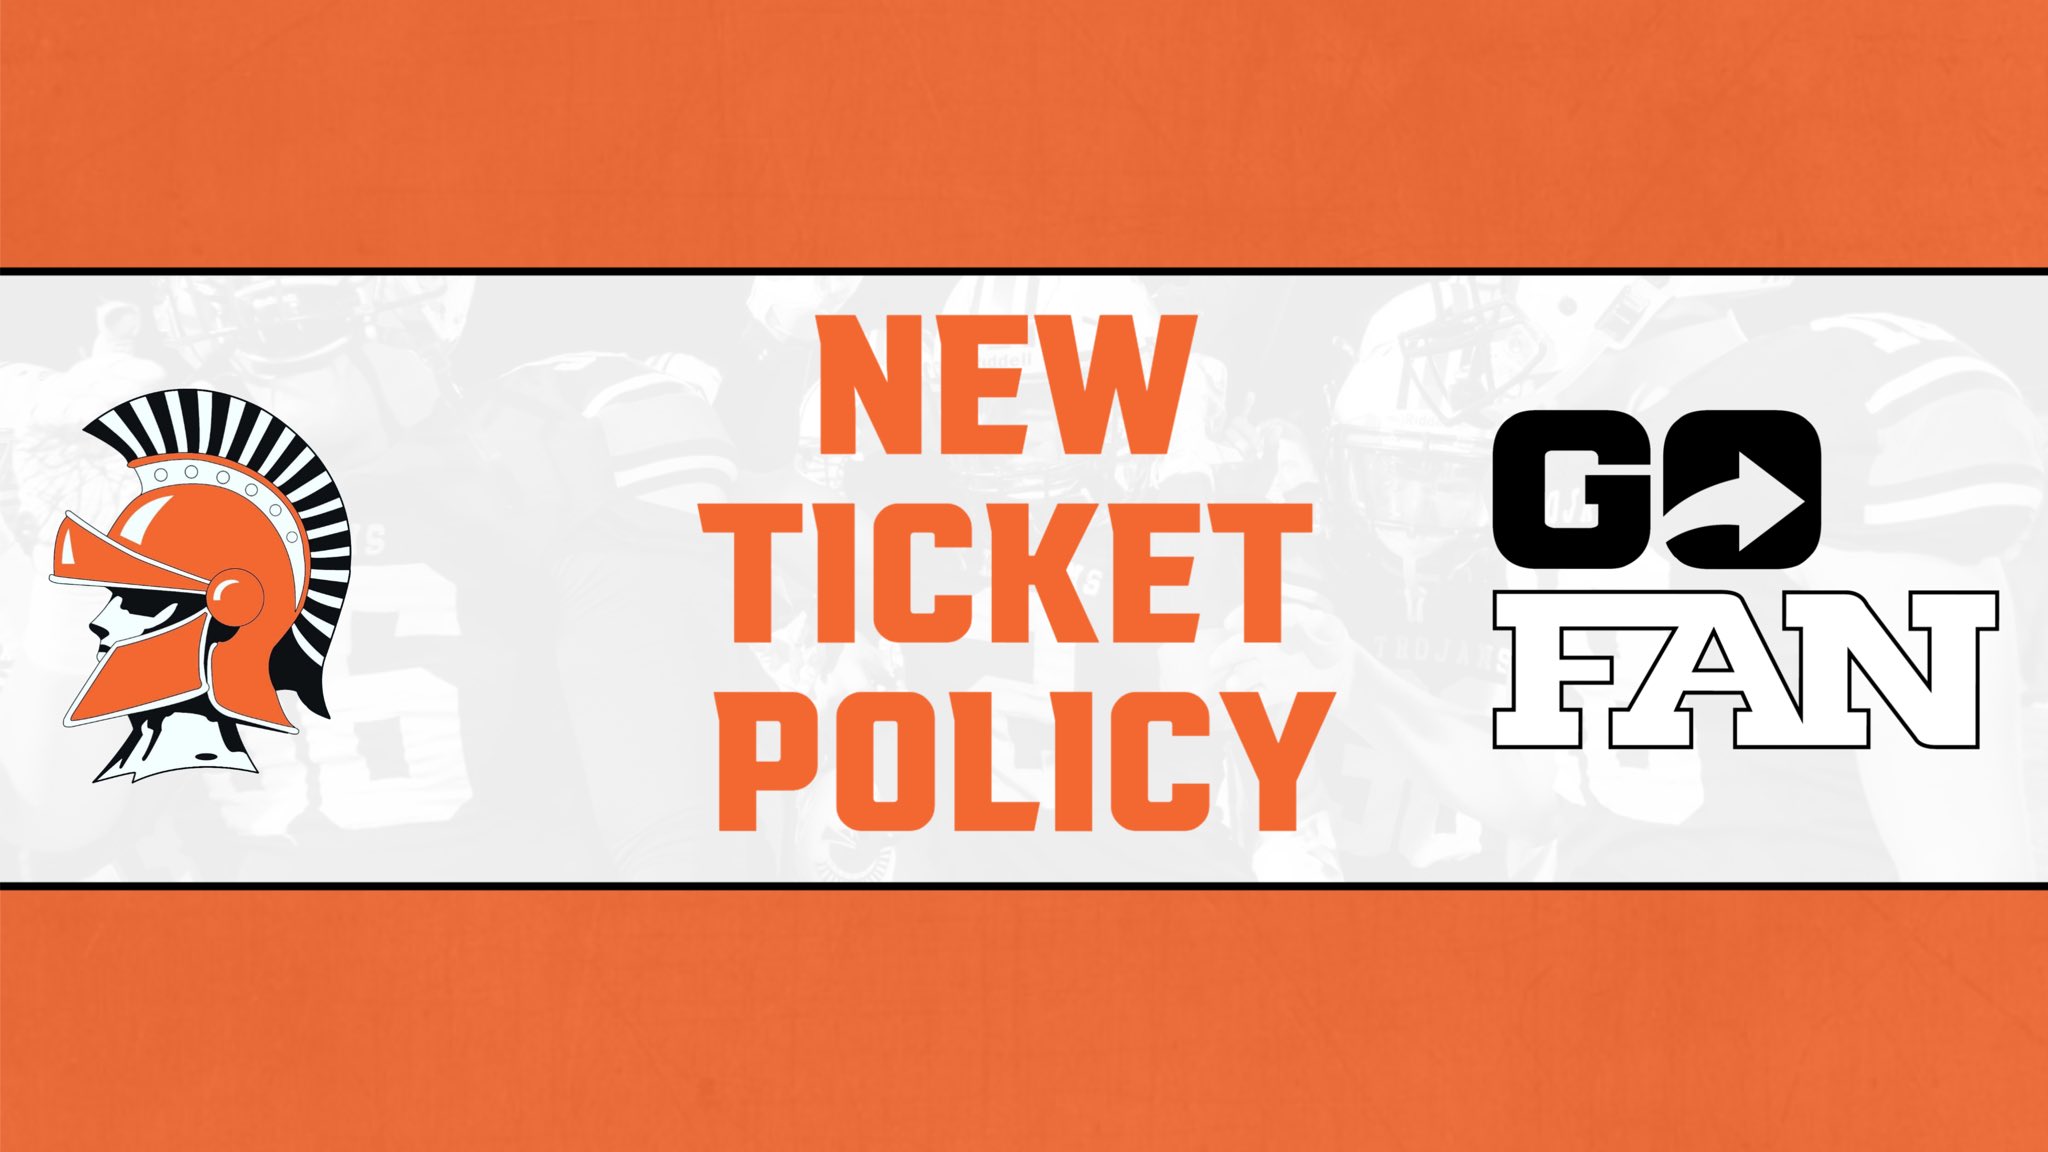 New Ticket Policy Image